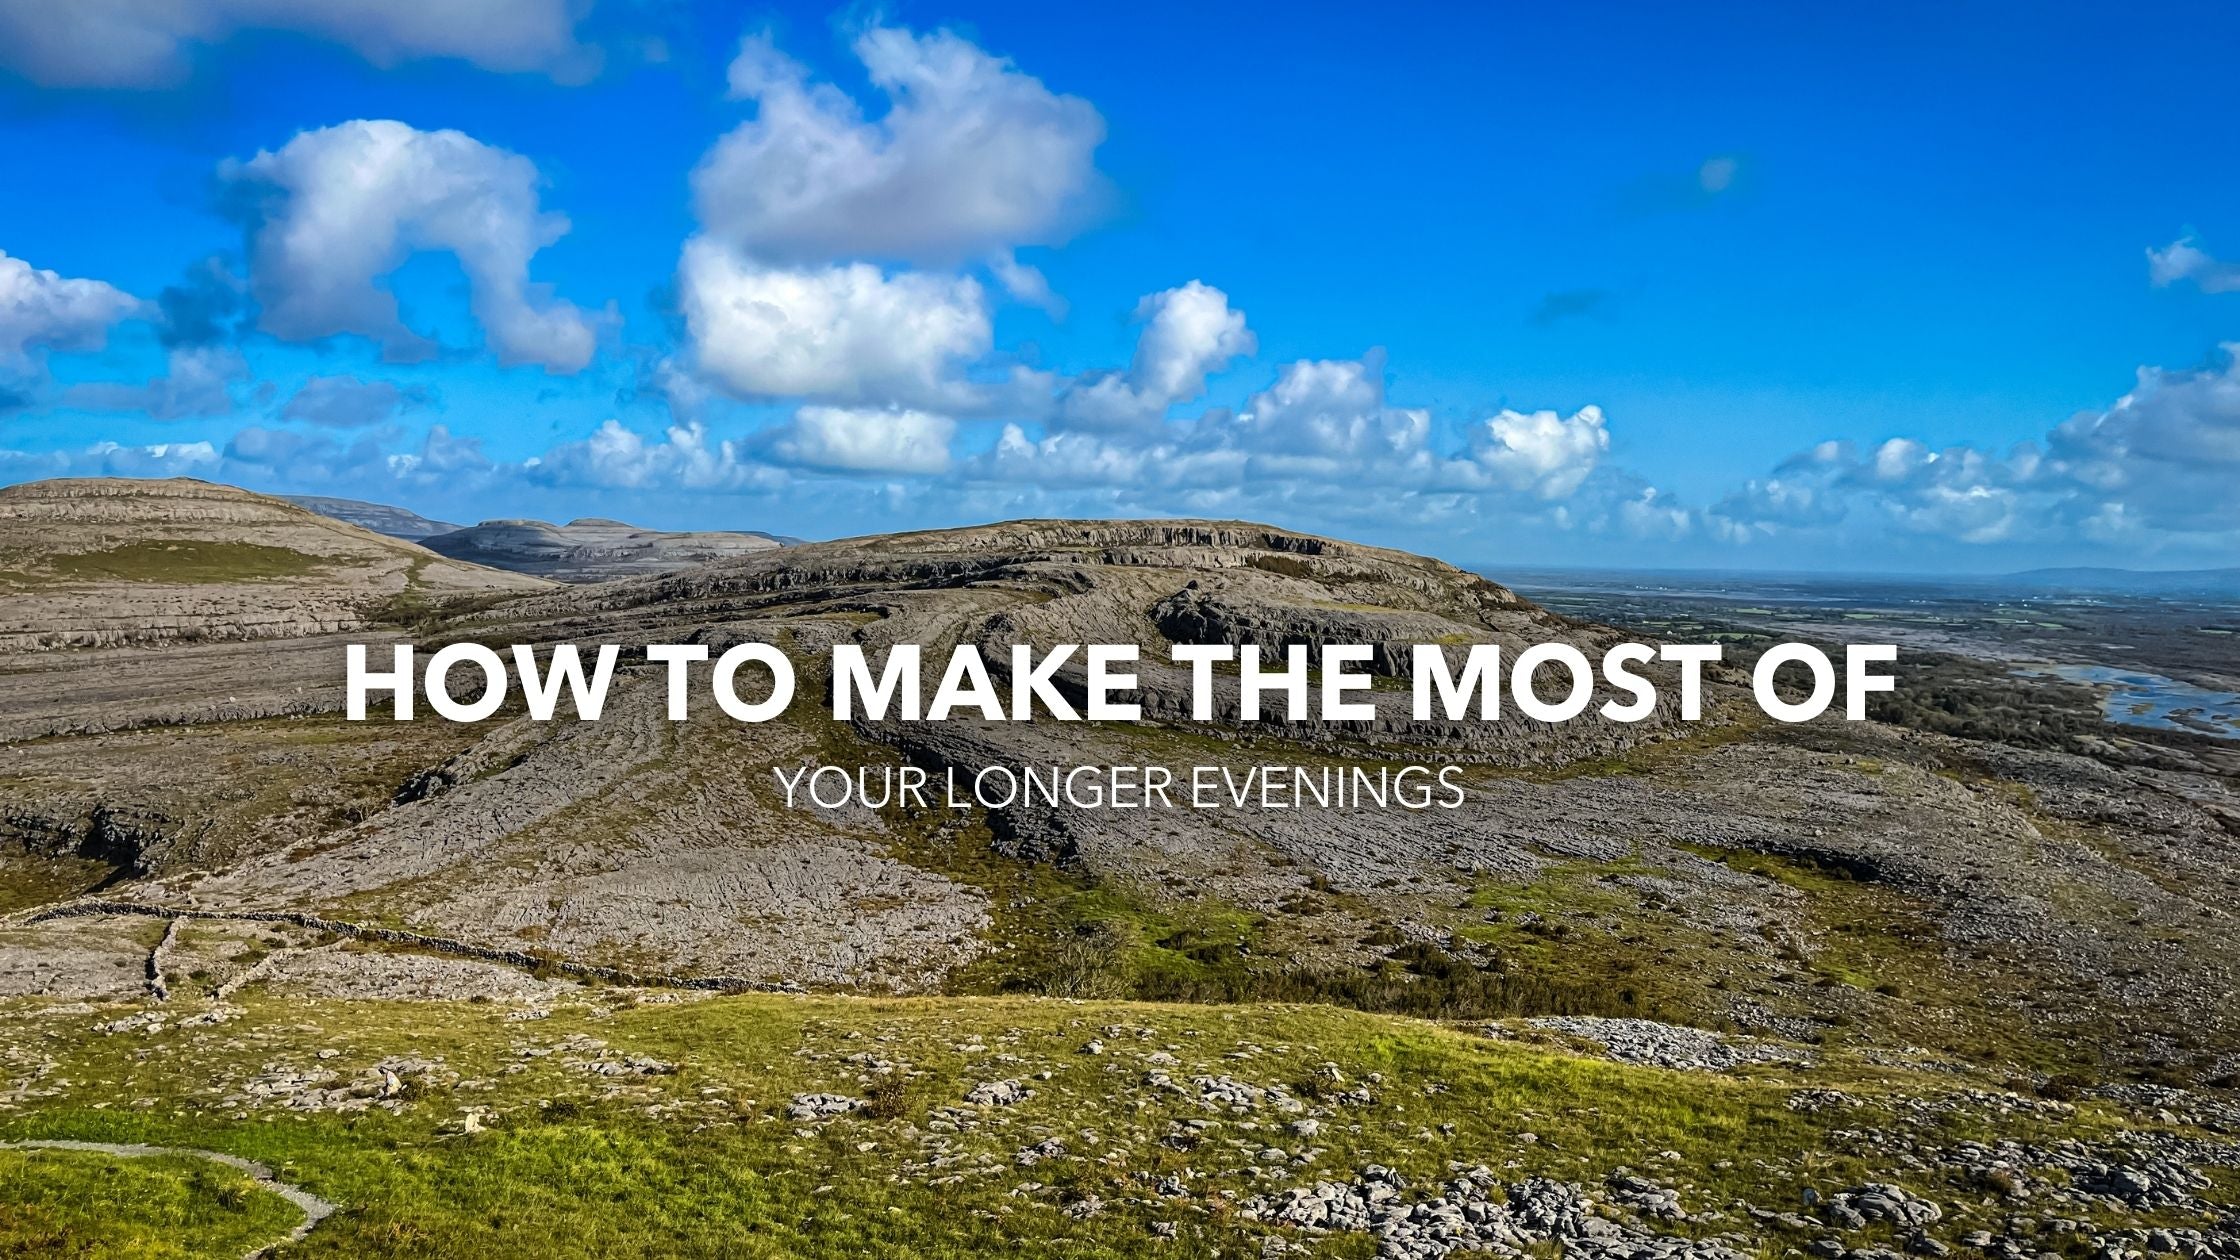 How to Make The Most of Your Longer Evenings